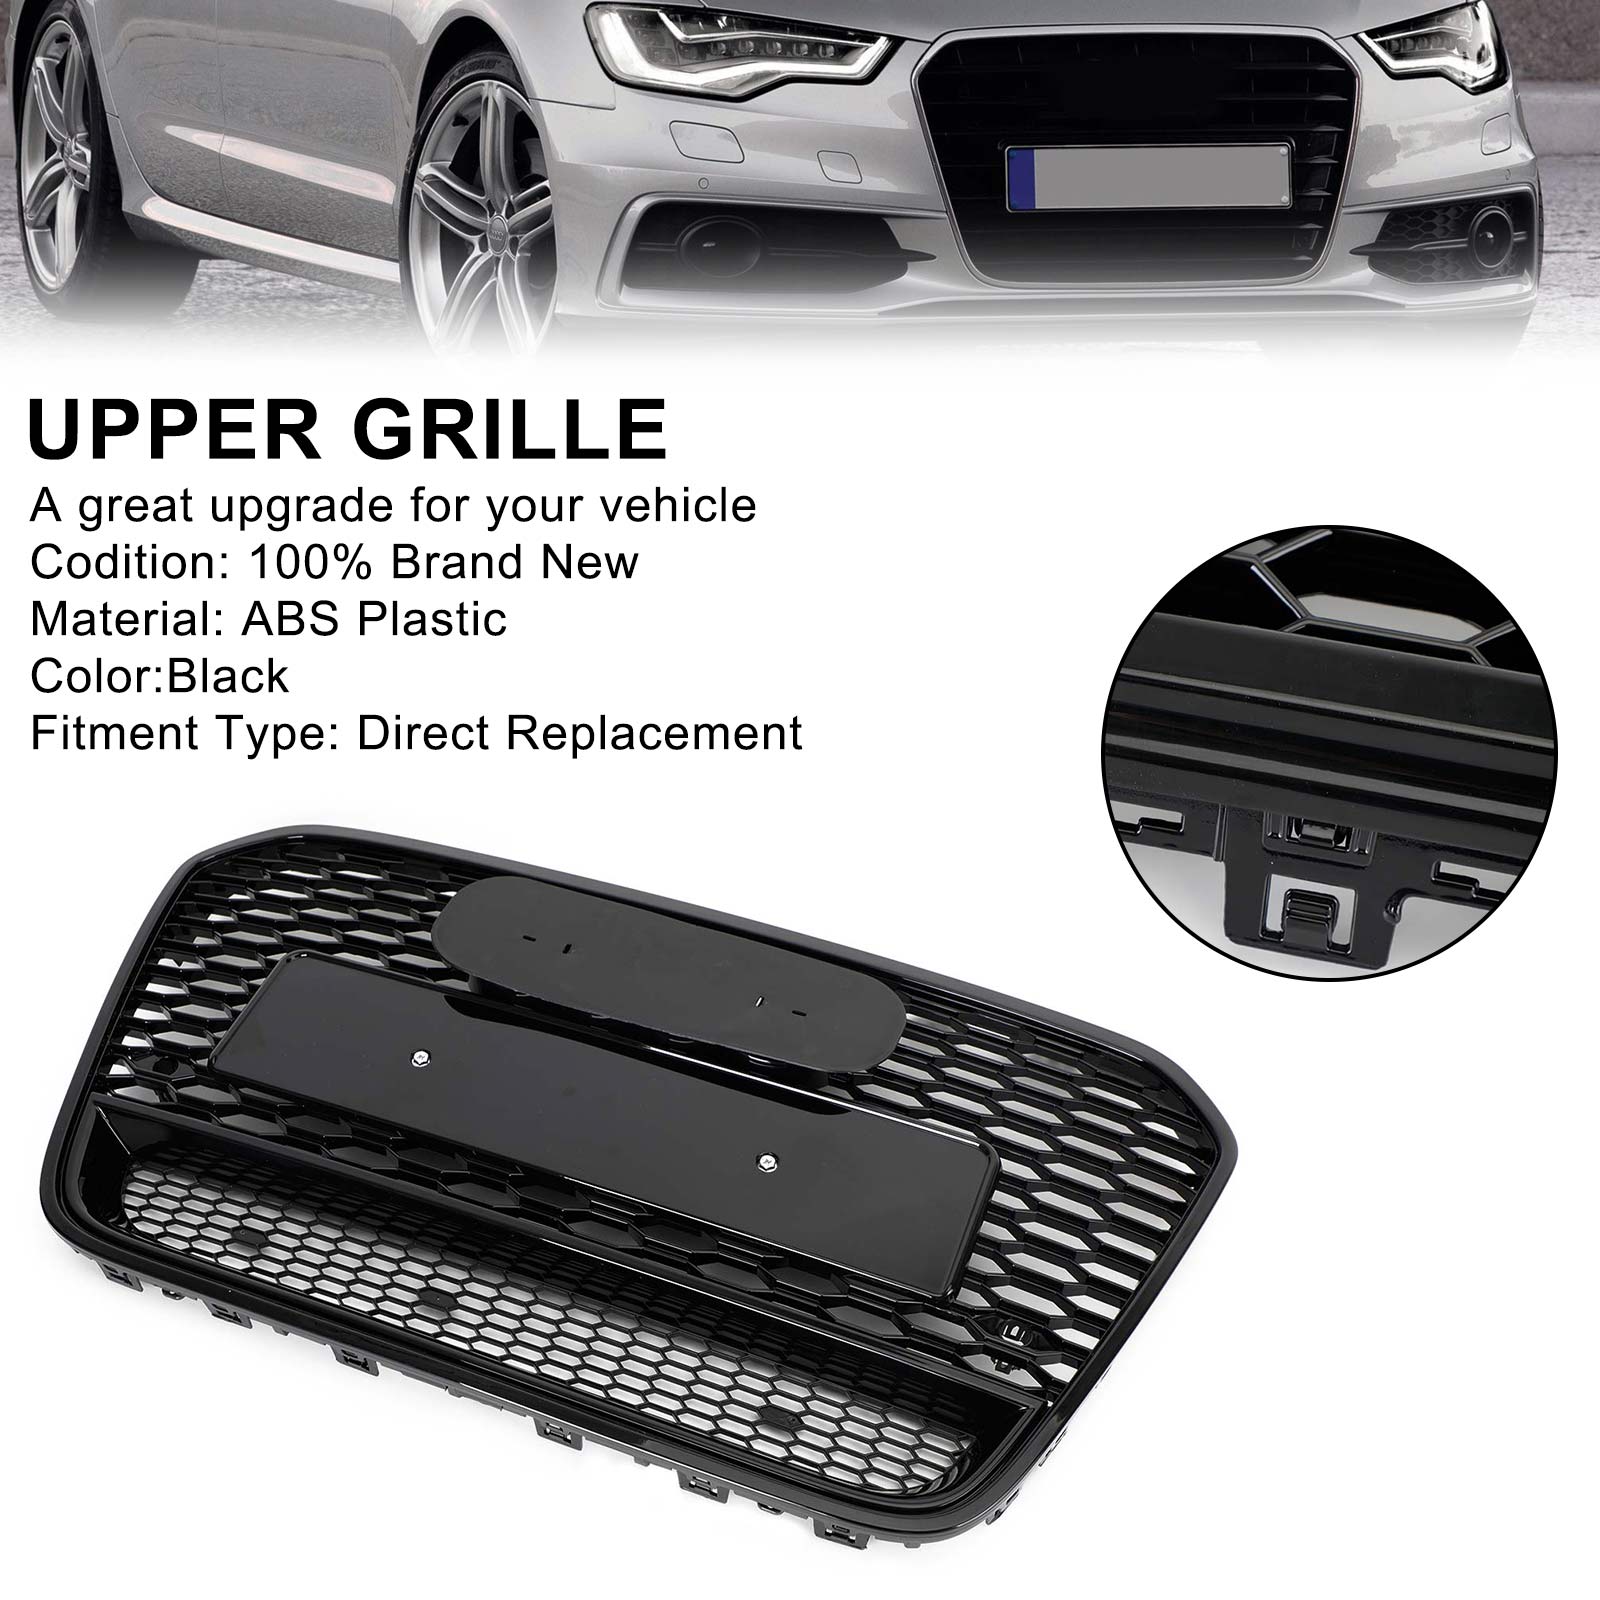 RS6 Style Front Mesh Honeycomb Grille Grill Fit Audi A6 S6 C7 2012-2015